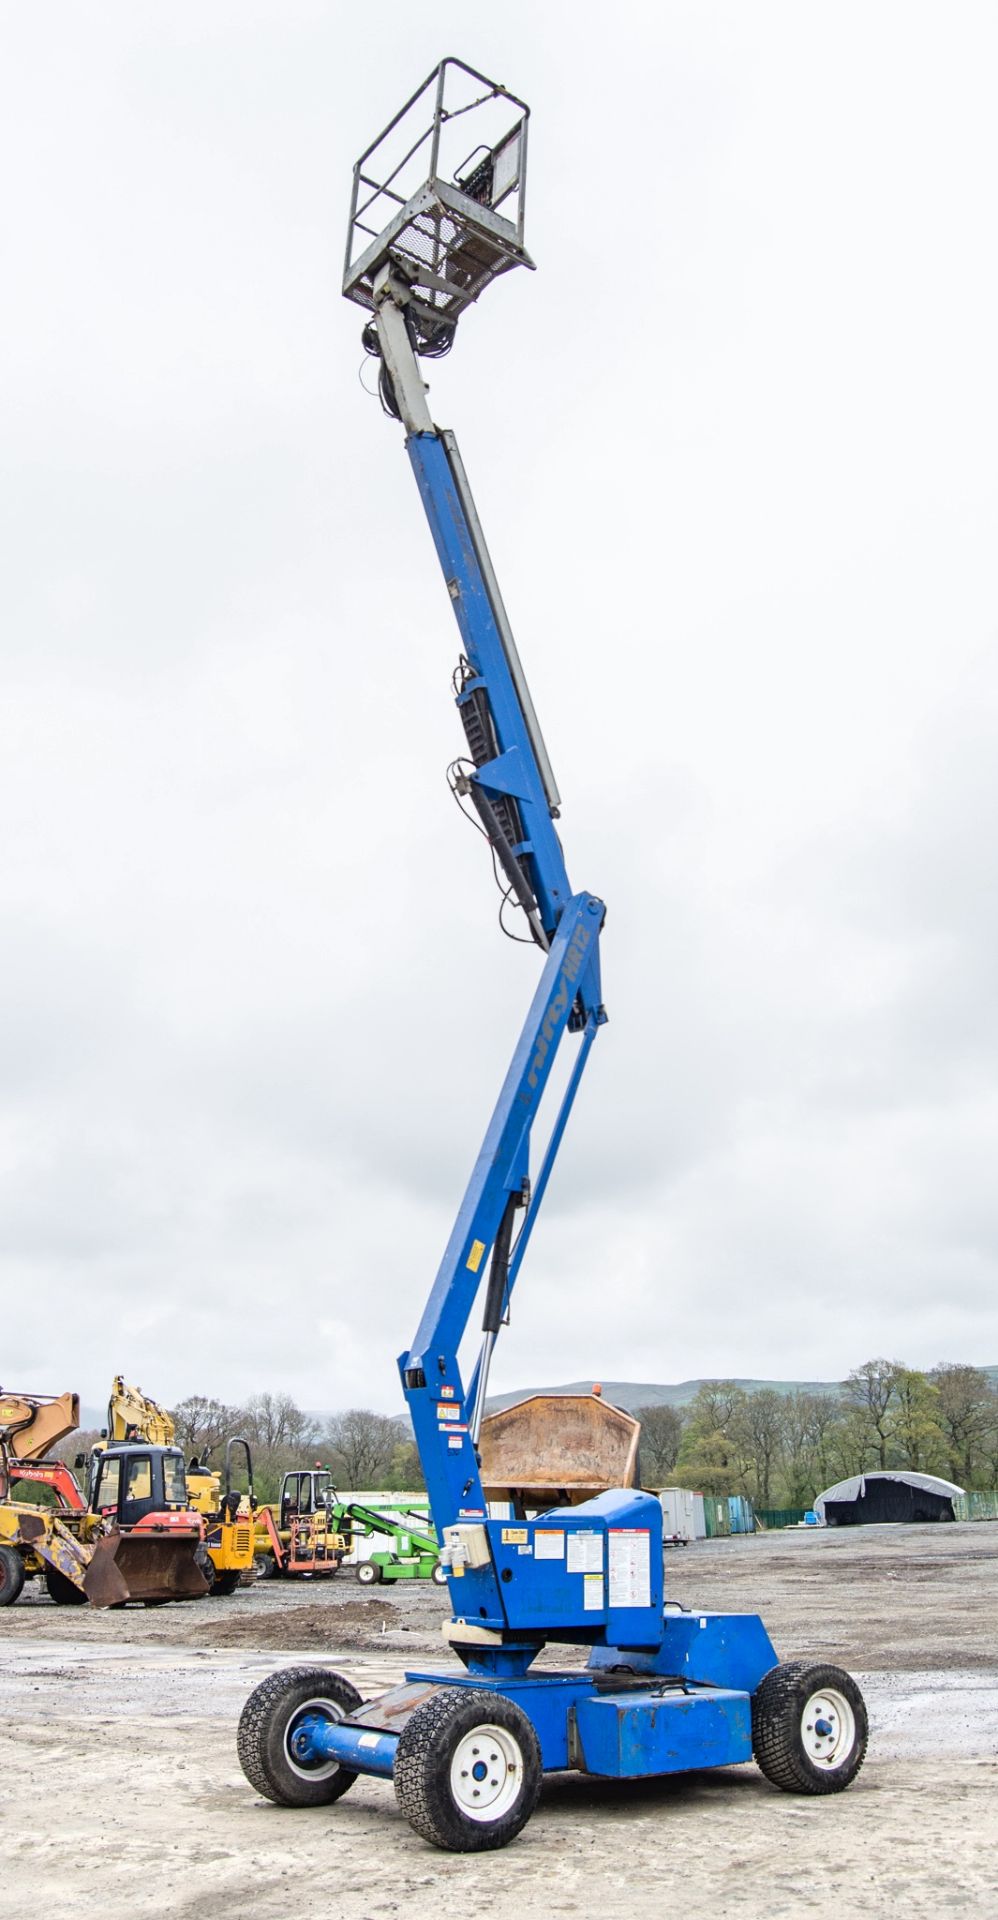 Nifty HR12 diesel/battery electric articulated boom access platform Year: 2011 S/N: 1220892 HYP175 - Image 9 of 13